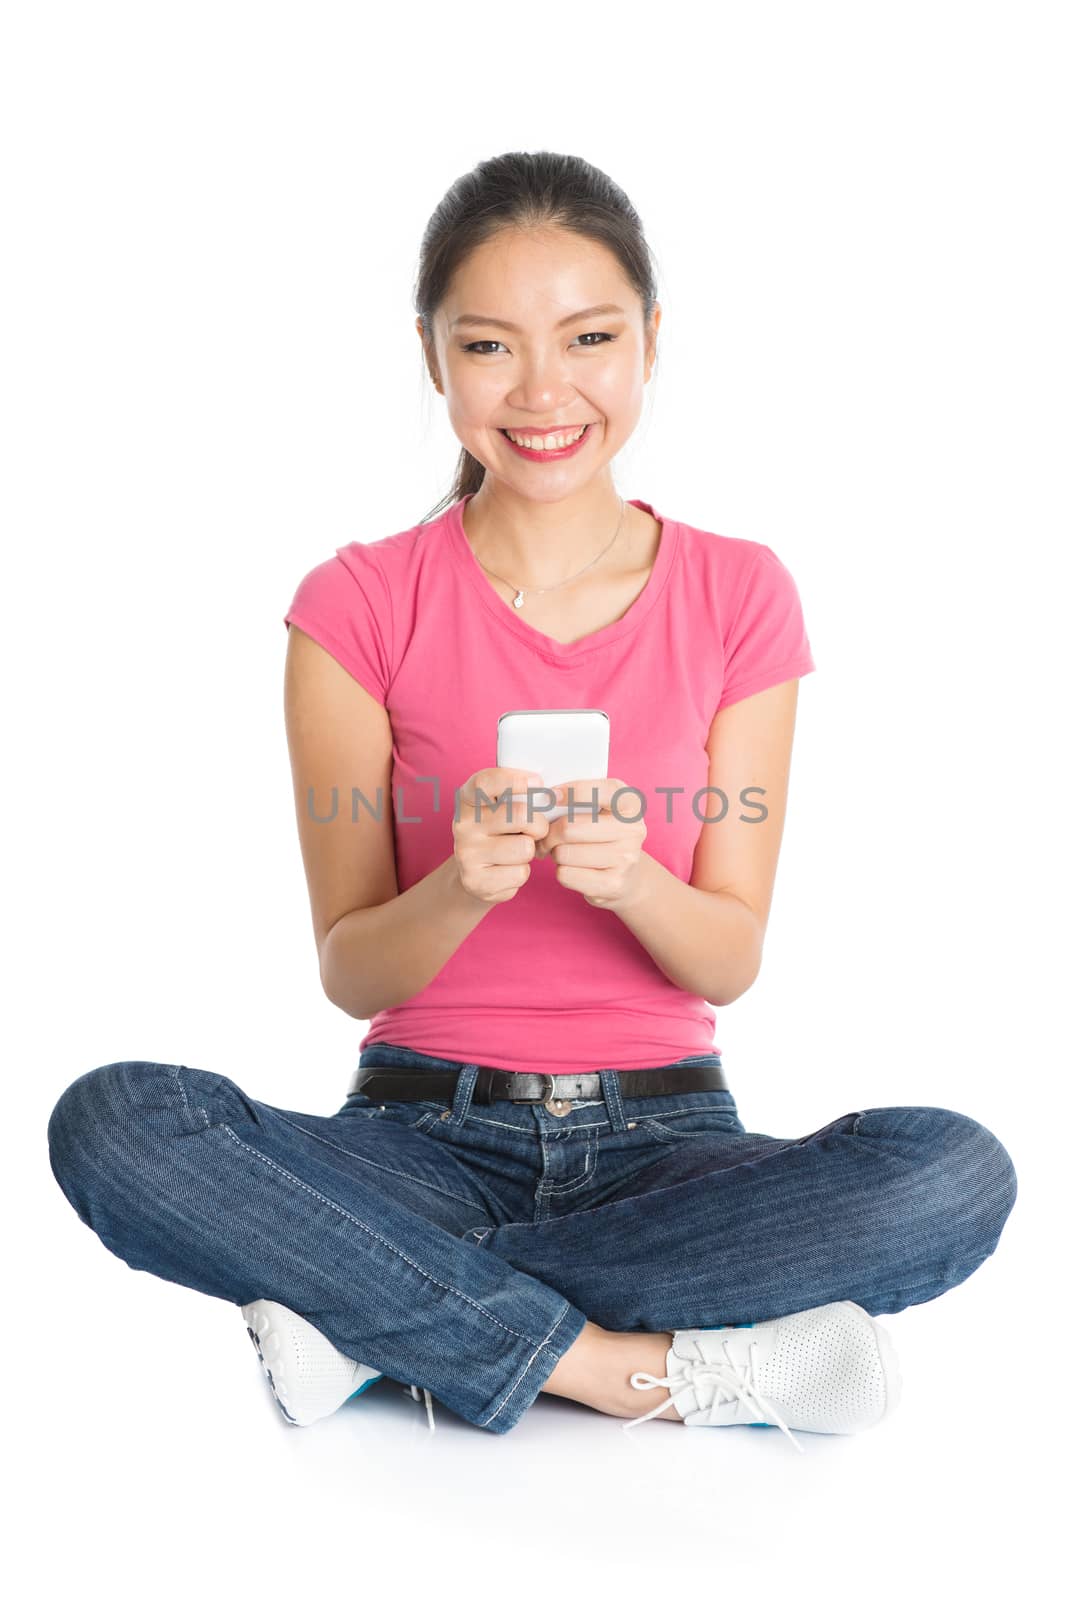 Full body young Asian girl in pink shirt texting with smartphone, seated on floor, full length isolated on white background.